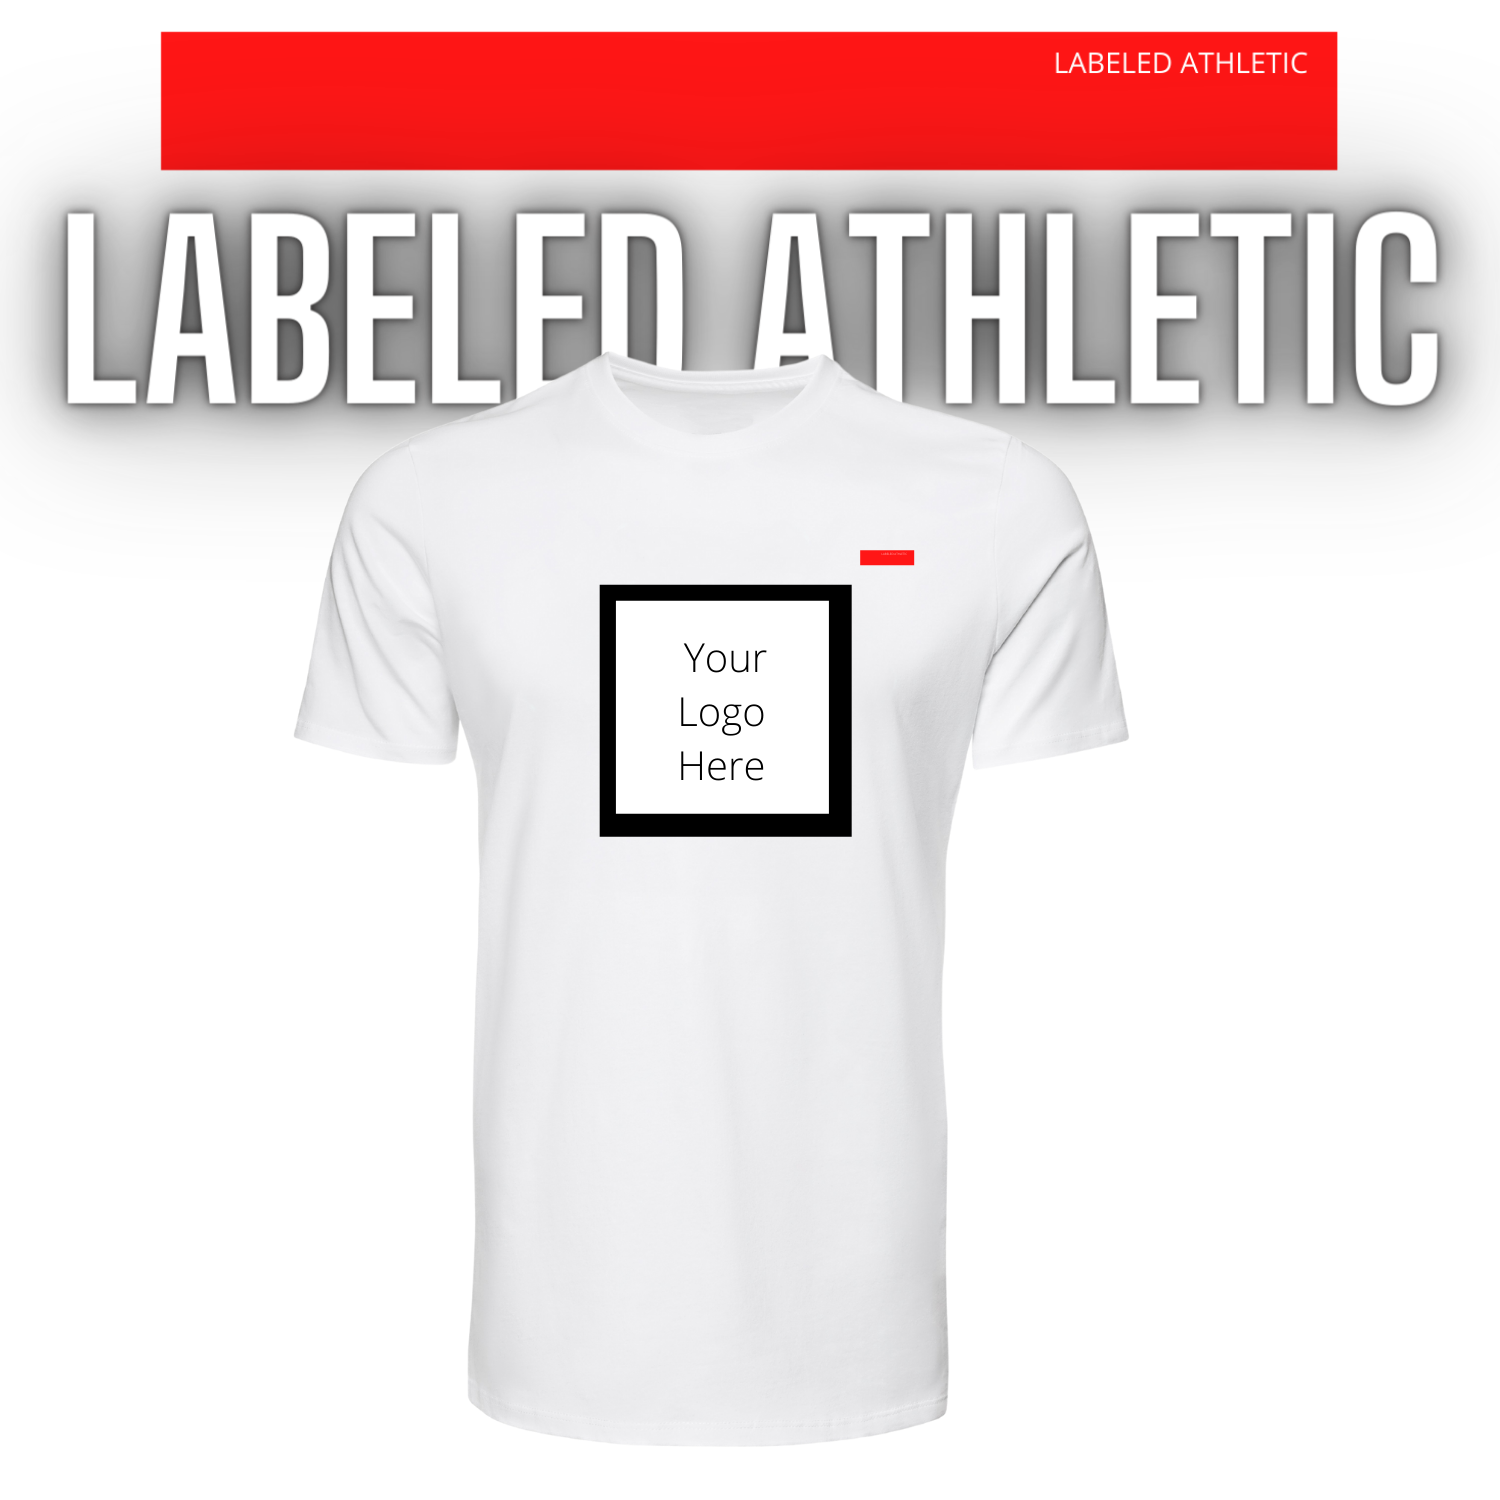 I AM LABELED ATHLETIC - FINAO